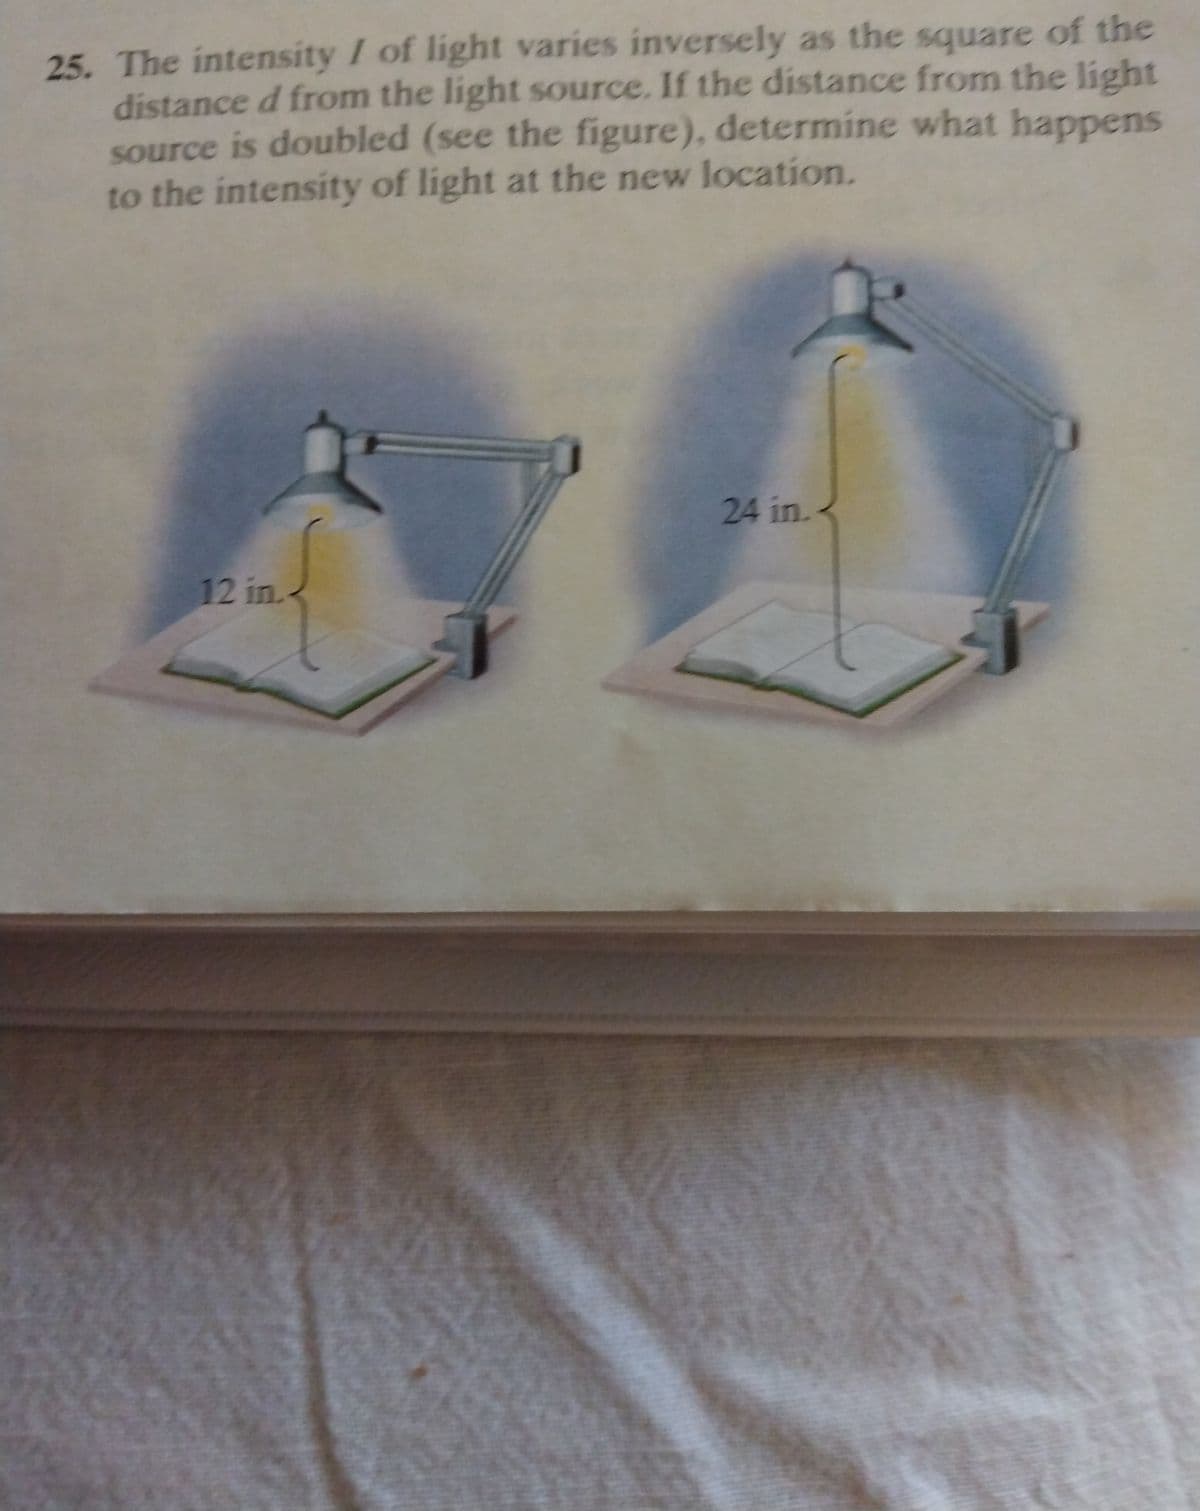 25. The intensity I of light varies inversely as the square of the
distance d from the light source. If the distance from the light
source is doubled (see the figure), determine what happens
to the intensity of light at the new location.
24 in.<
12 in.
